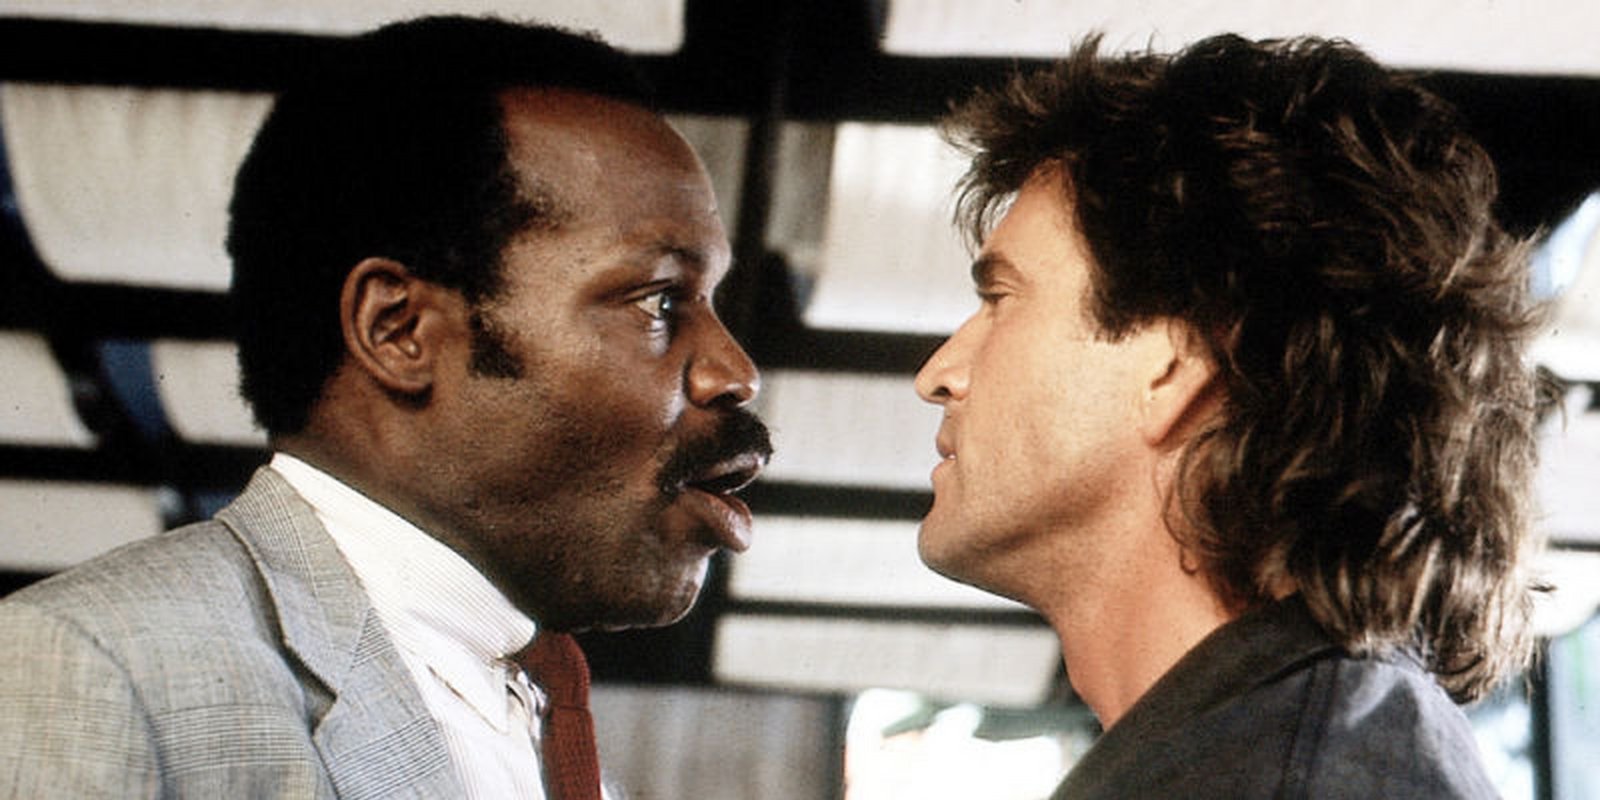 Lethal Weapon 1